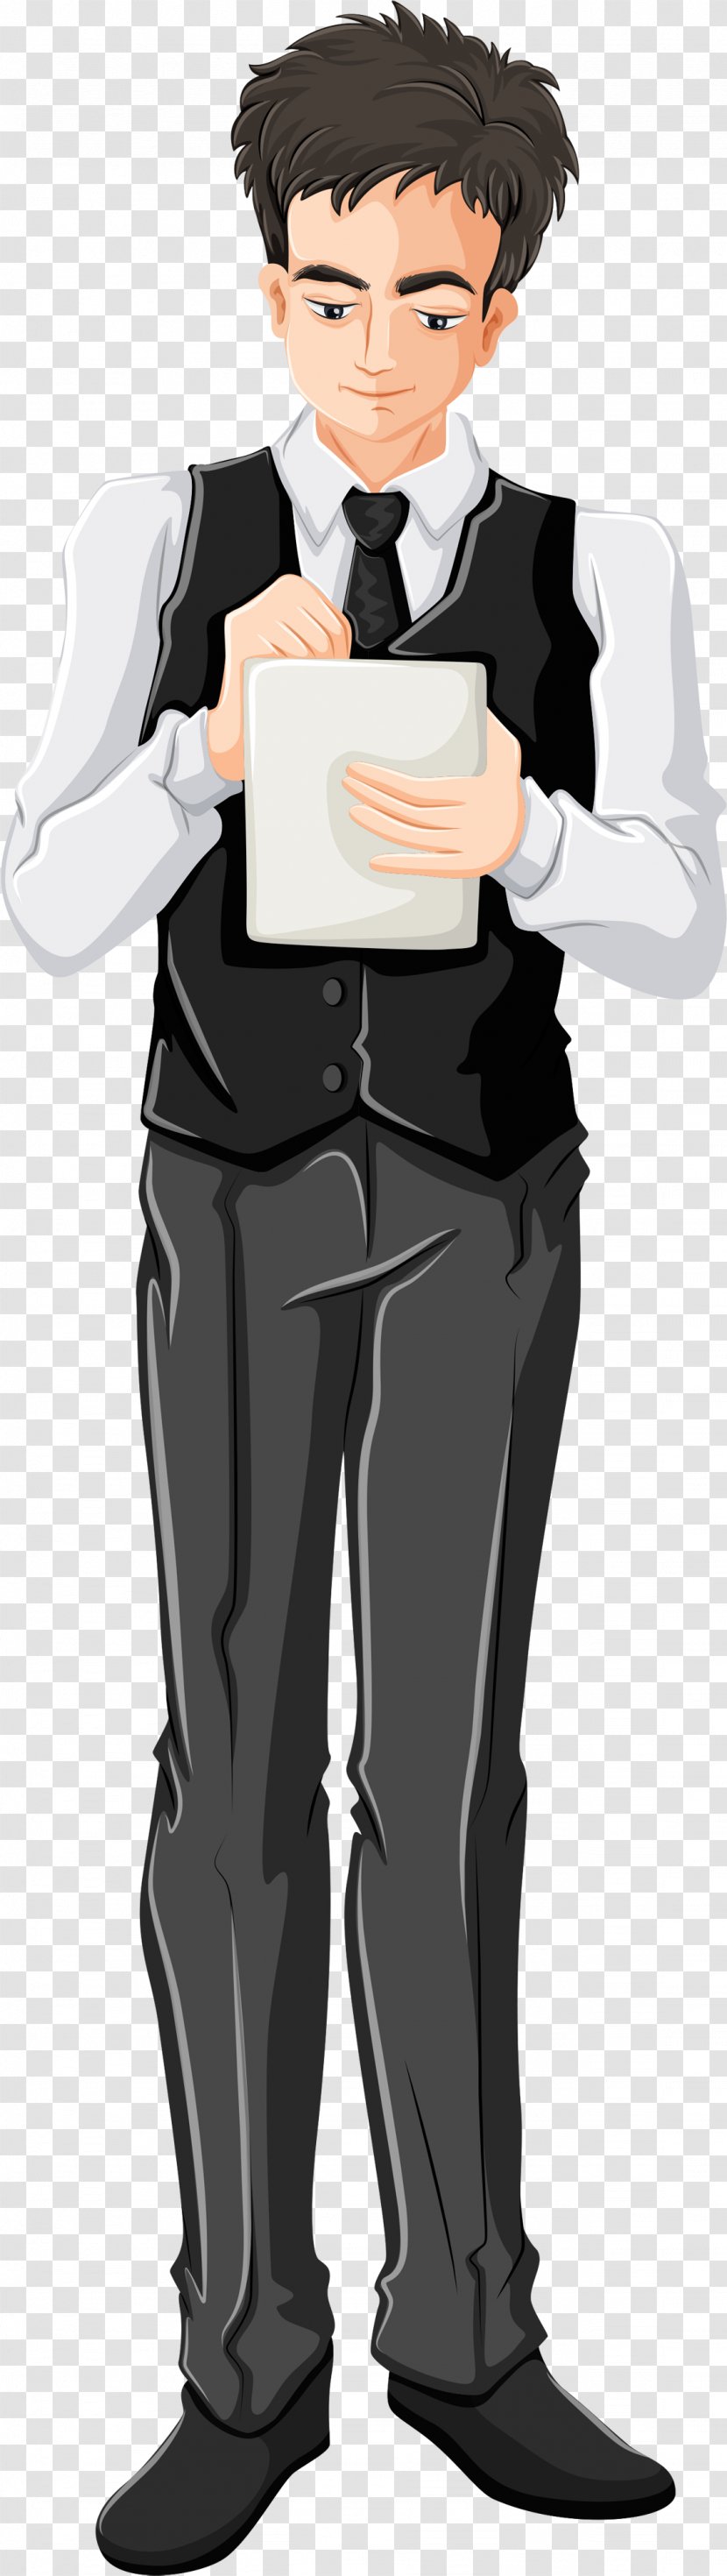 Waiter Drawing - Flower - Occupational Transparent PNG